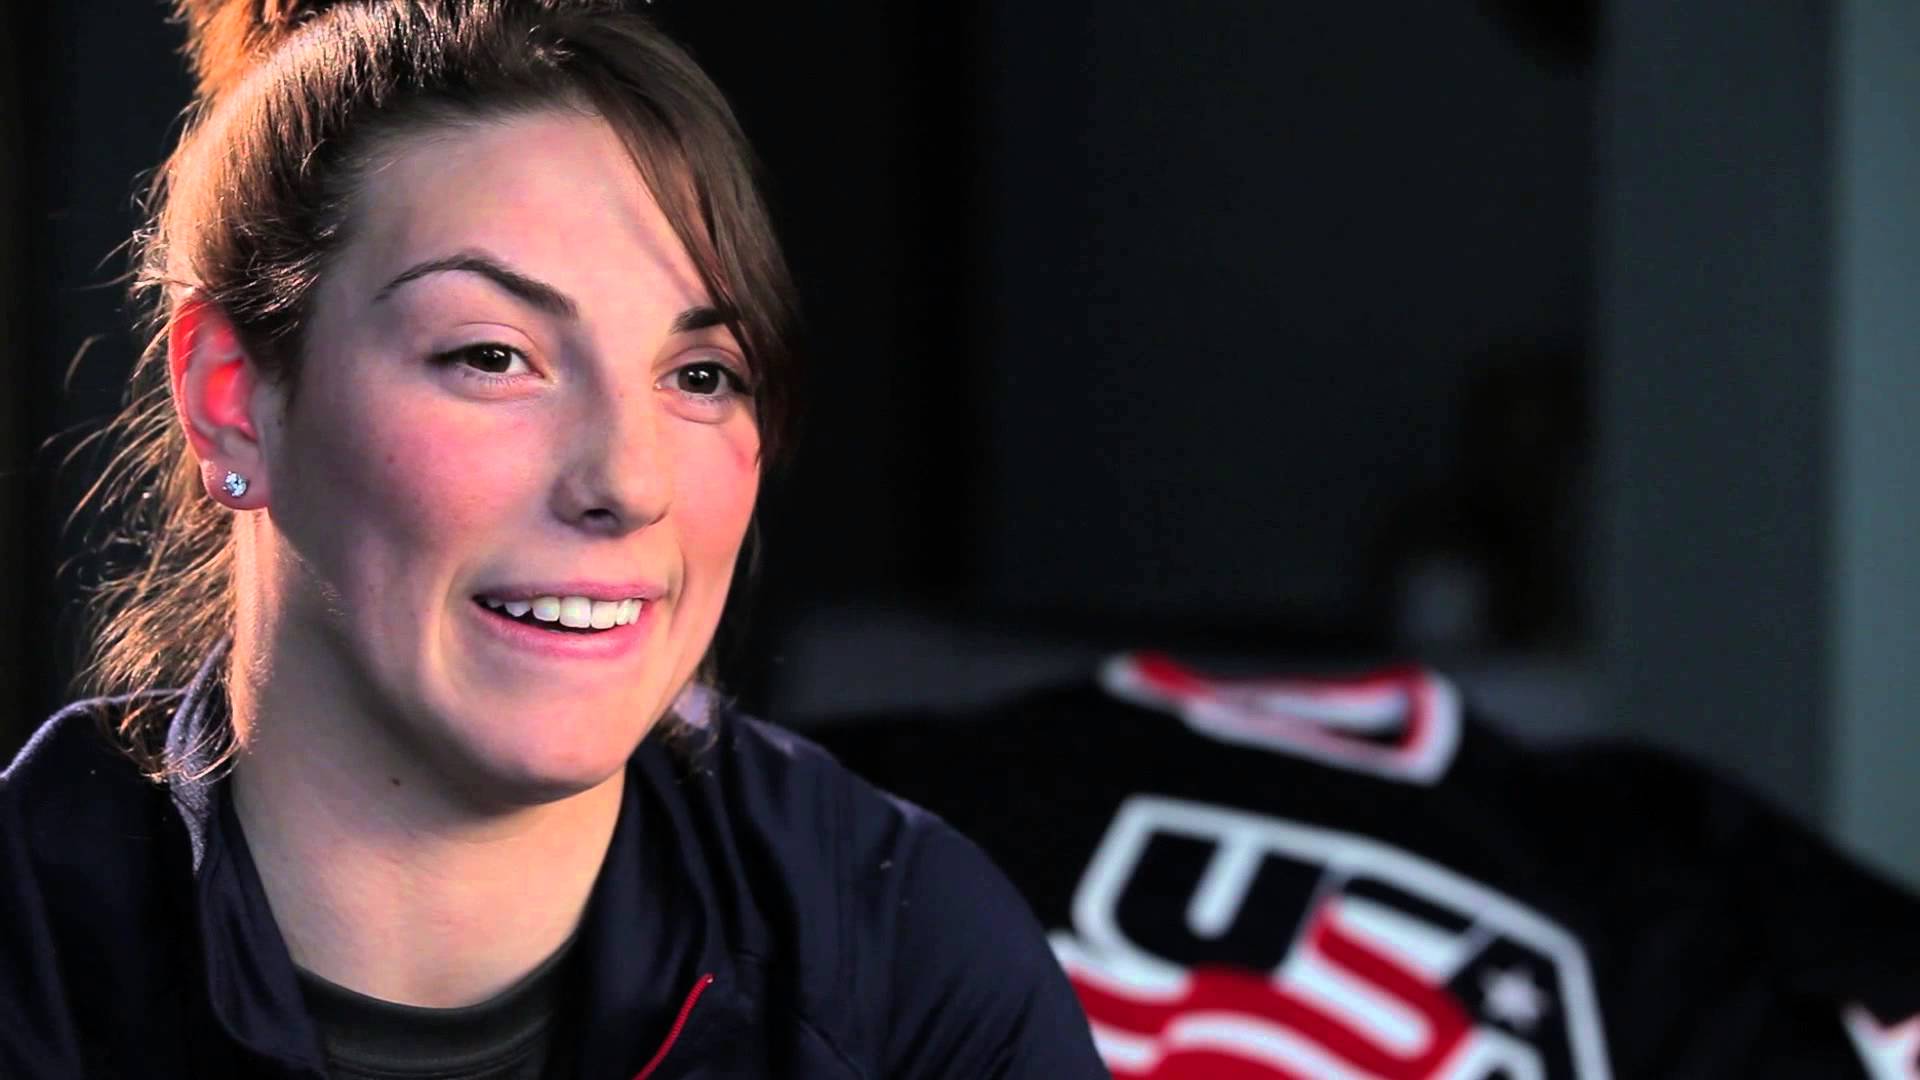 Hilary Knight Wallpapers images